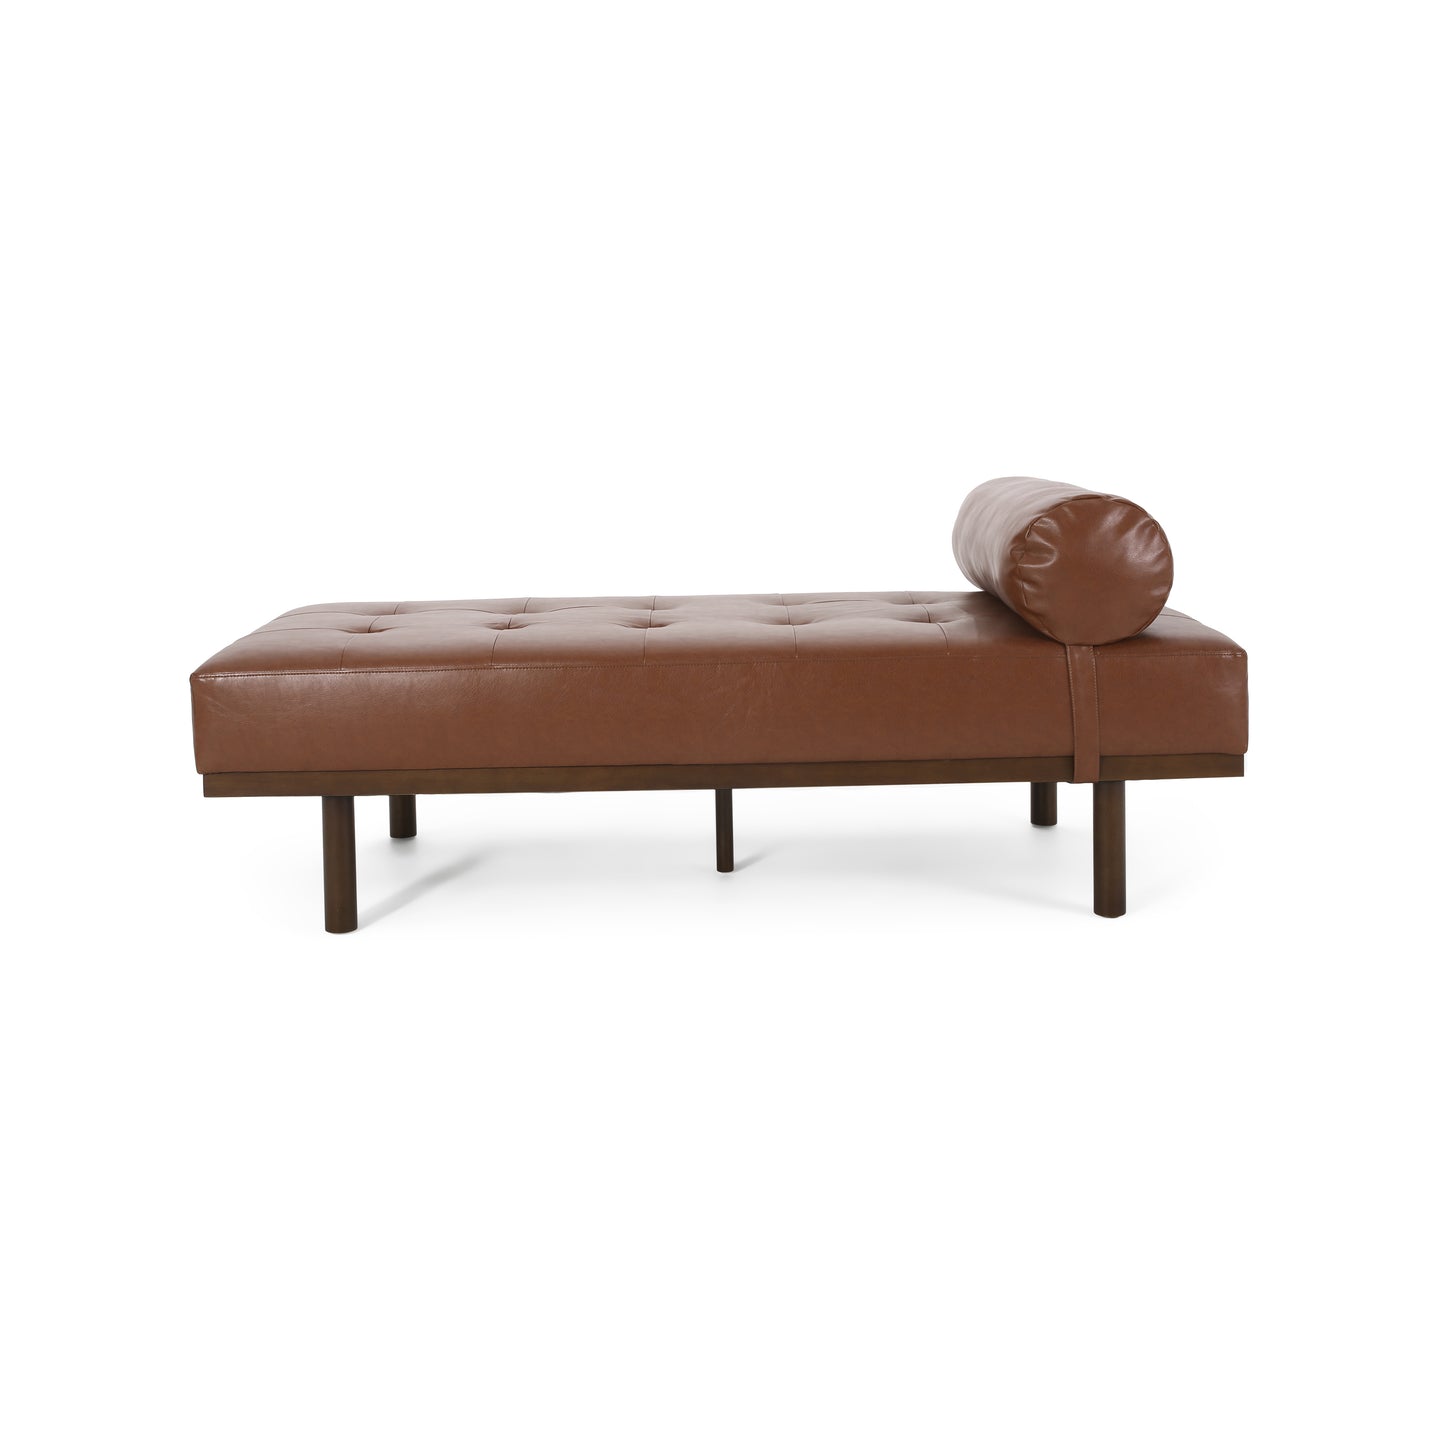 Elmore Mid Century Modern Faux Leather Tufted Chaise Lounge with Bolster Pillow